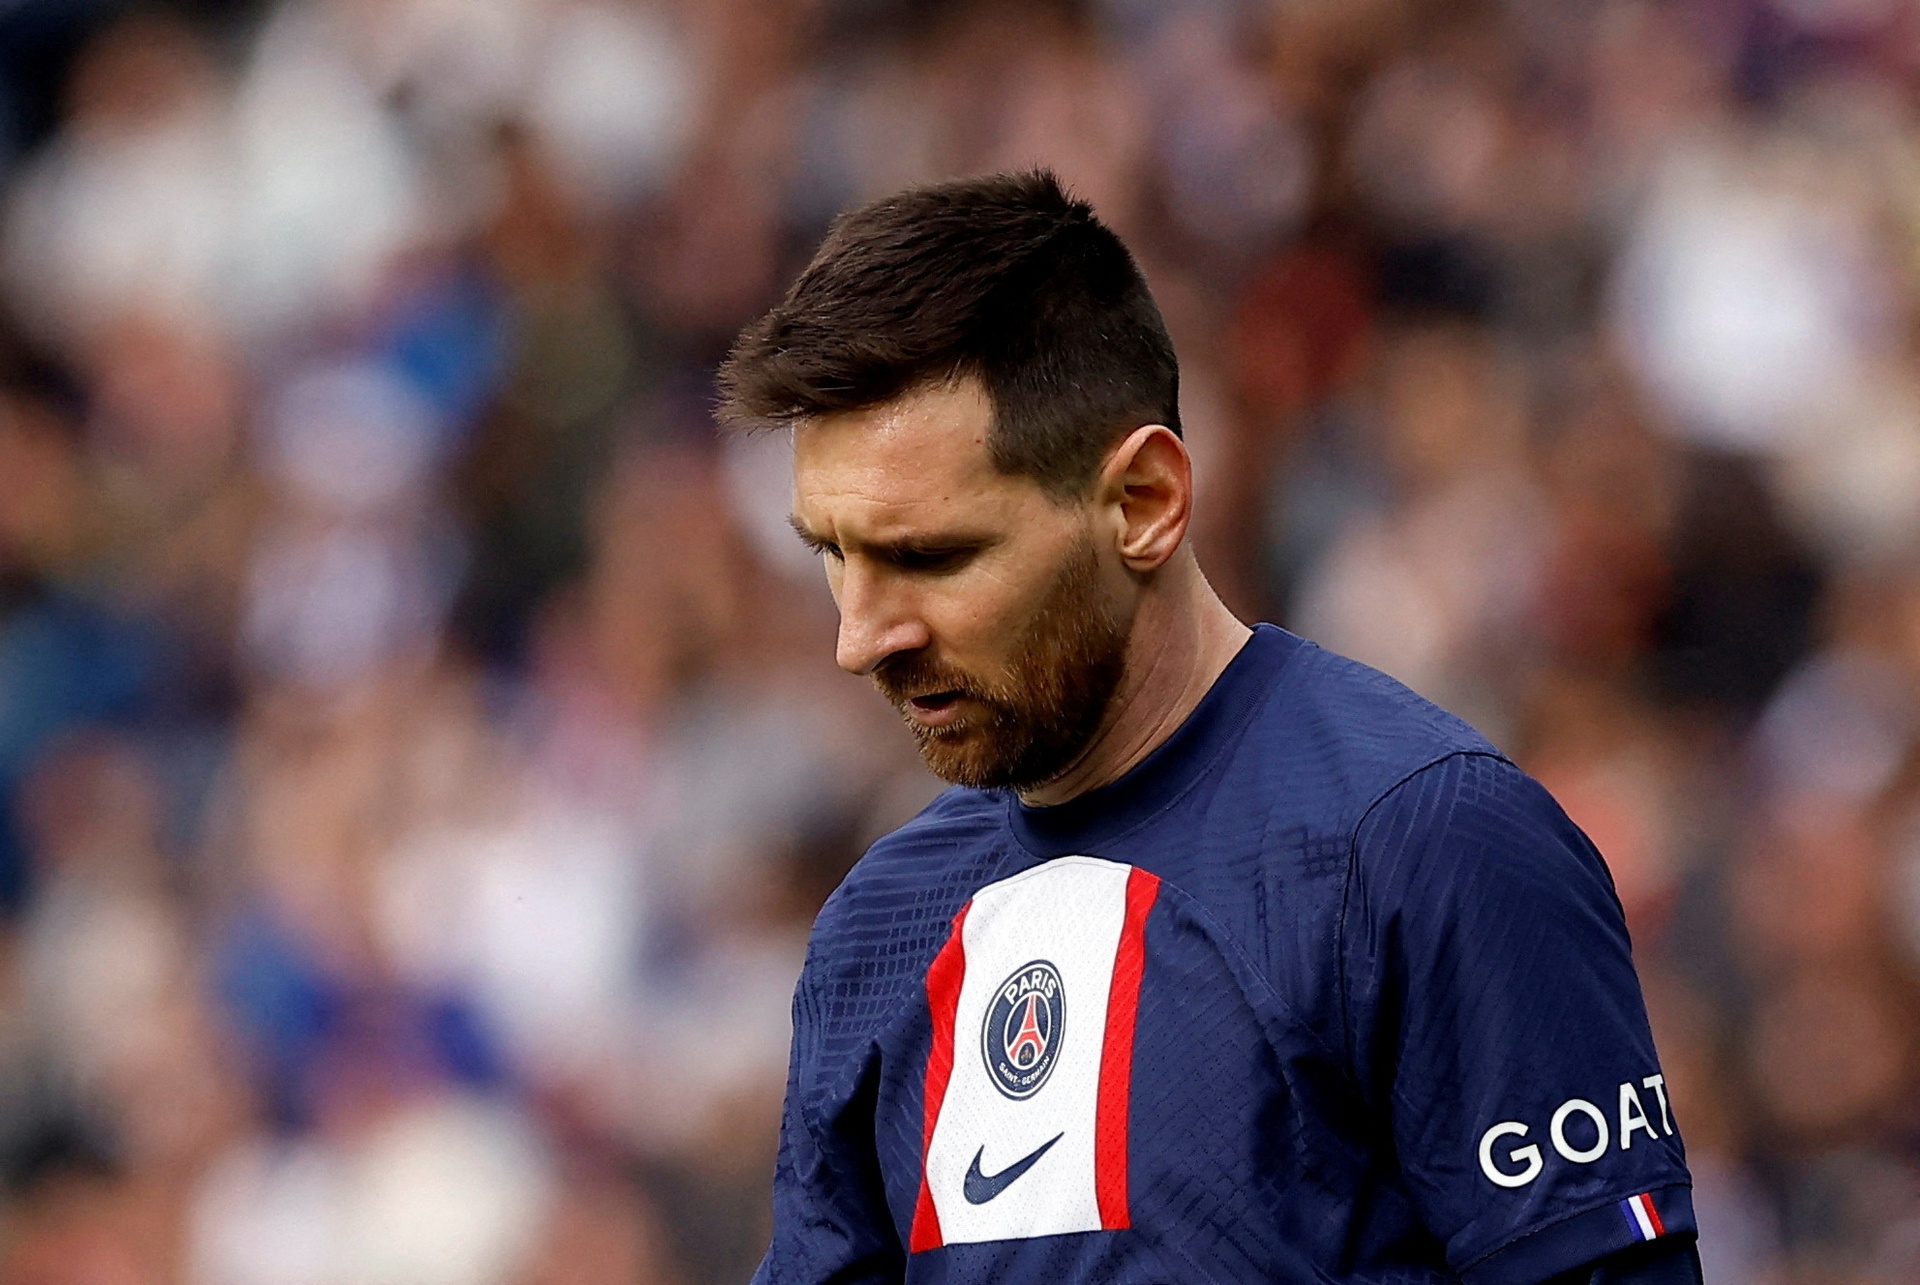 PSG was wrong about Messi - Football